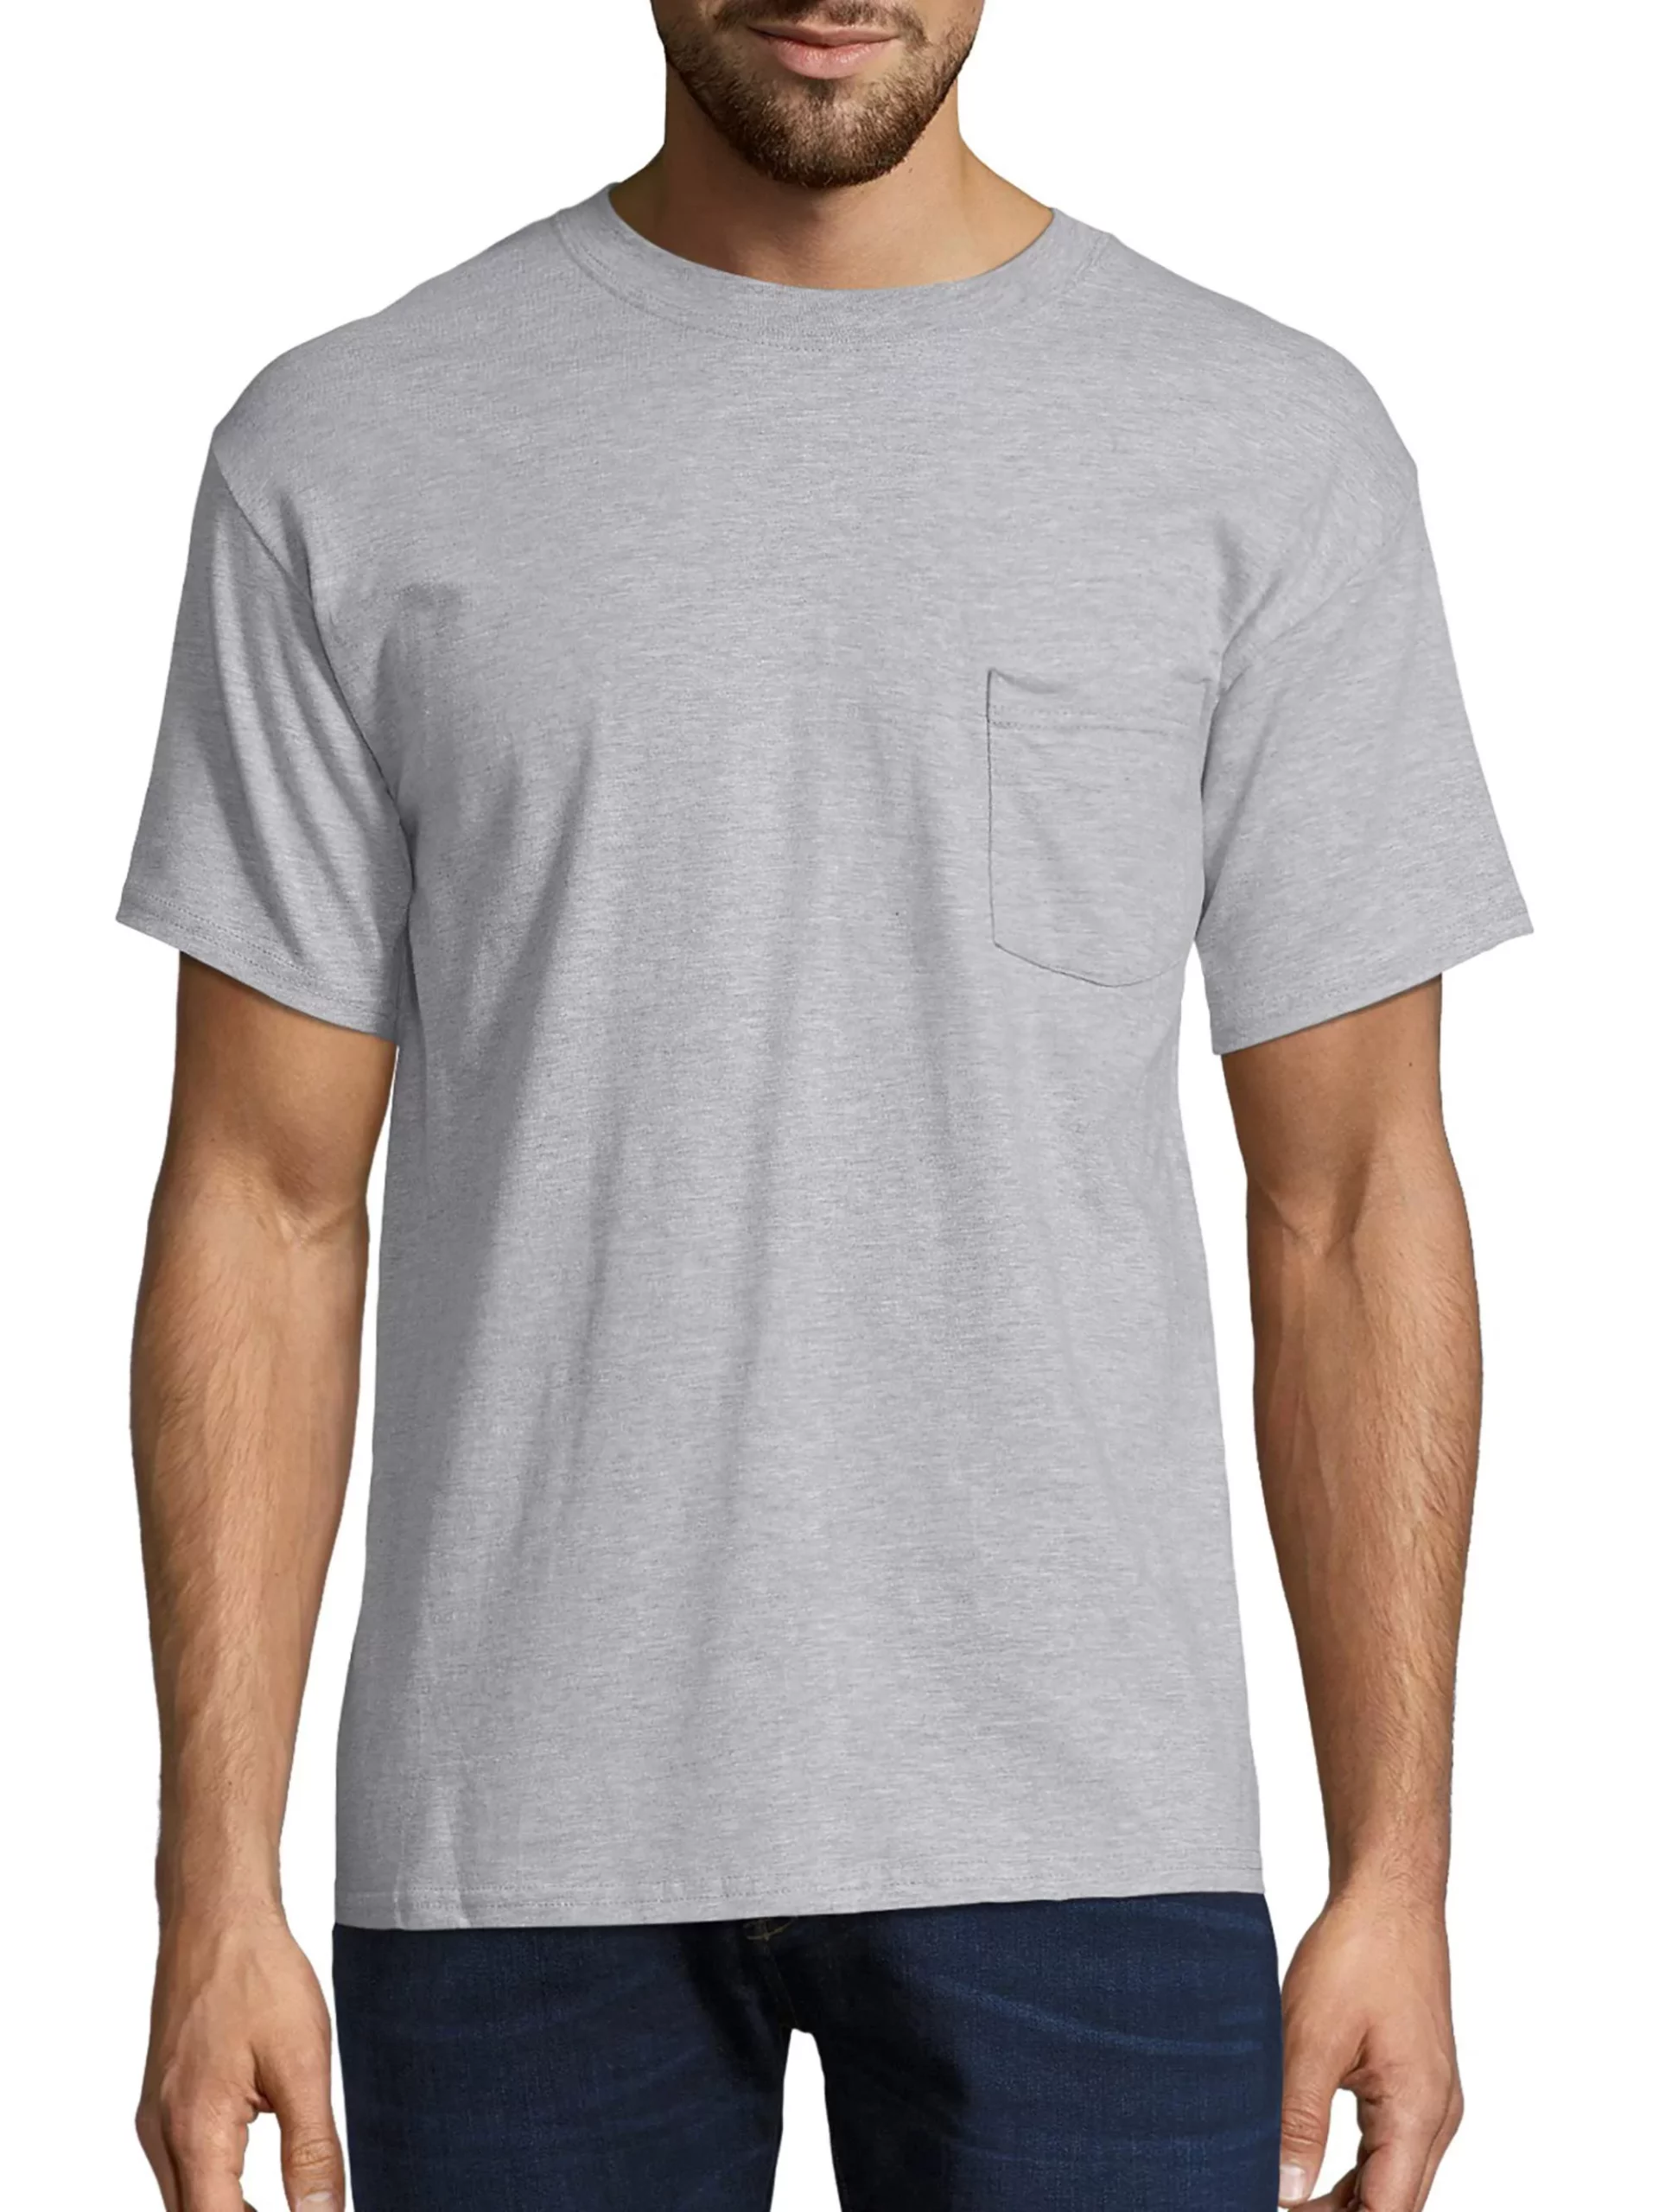 Soft and Durable Hanes Men's Tagless Short Sleeve Pocket T-Shirt for Everyday Comfort